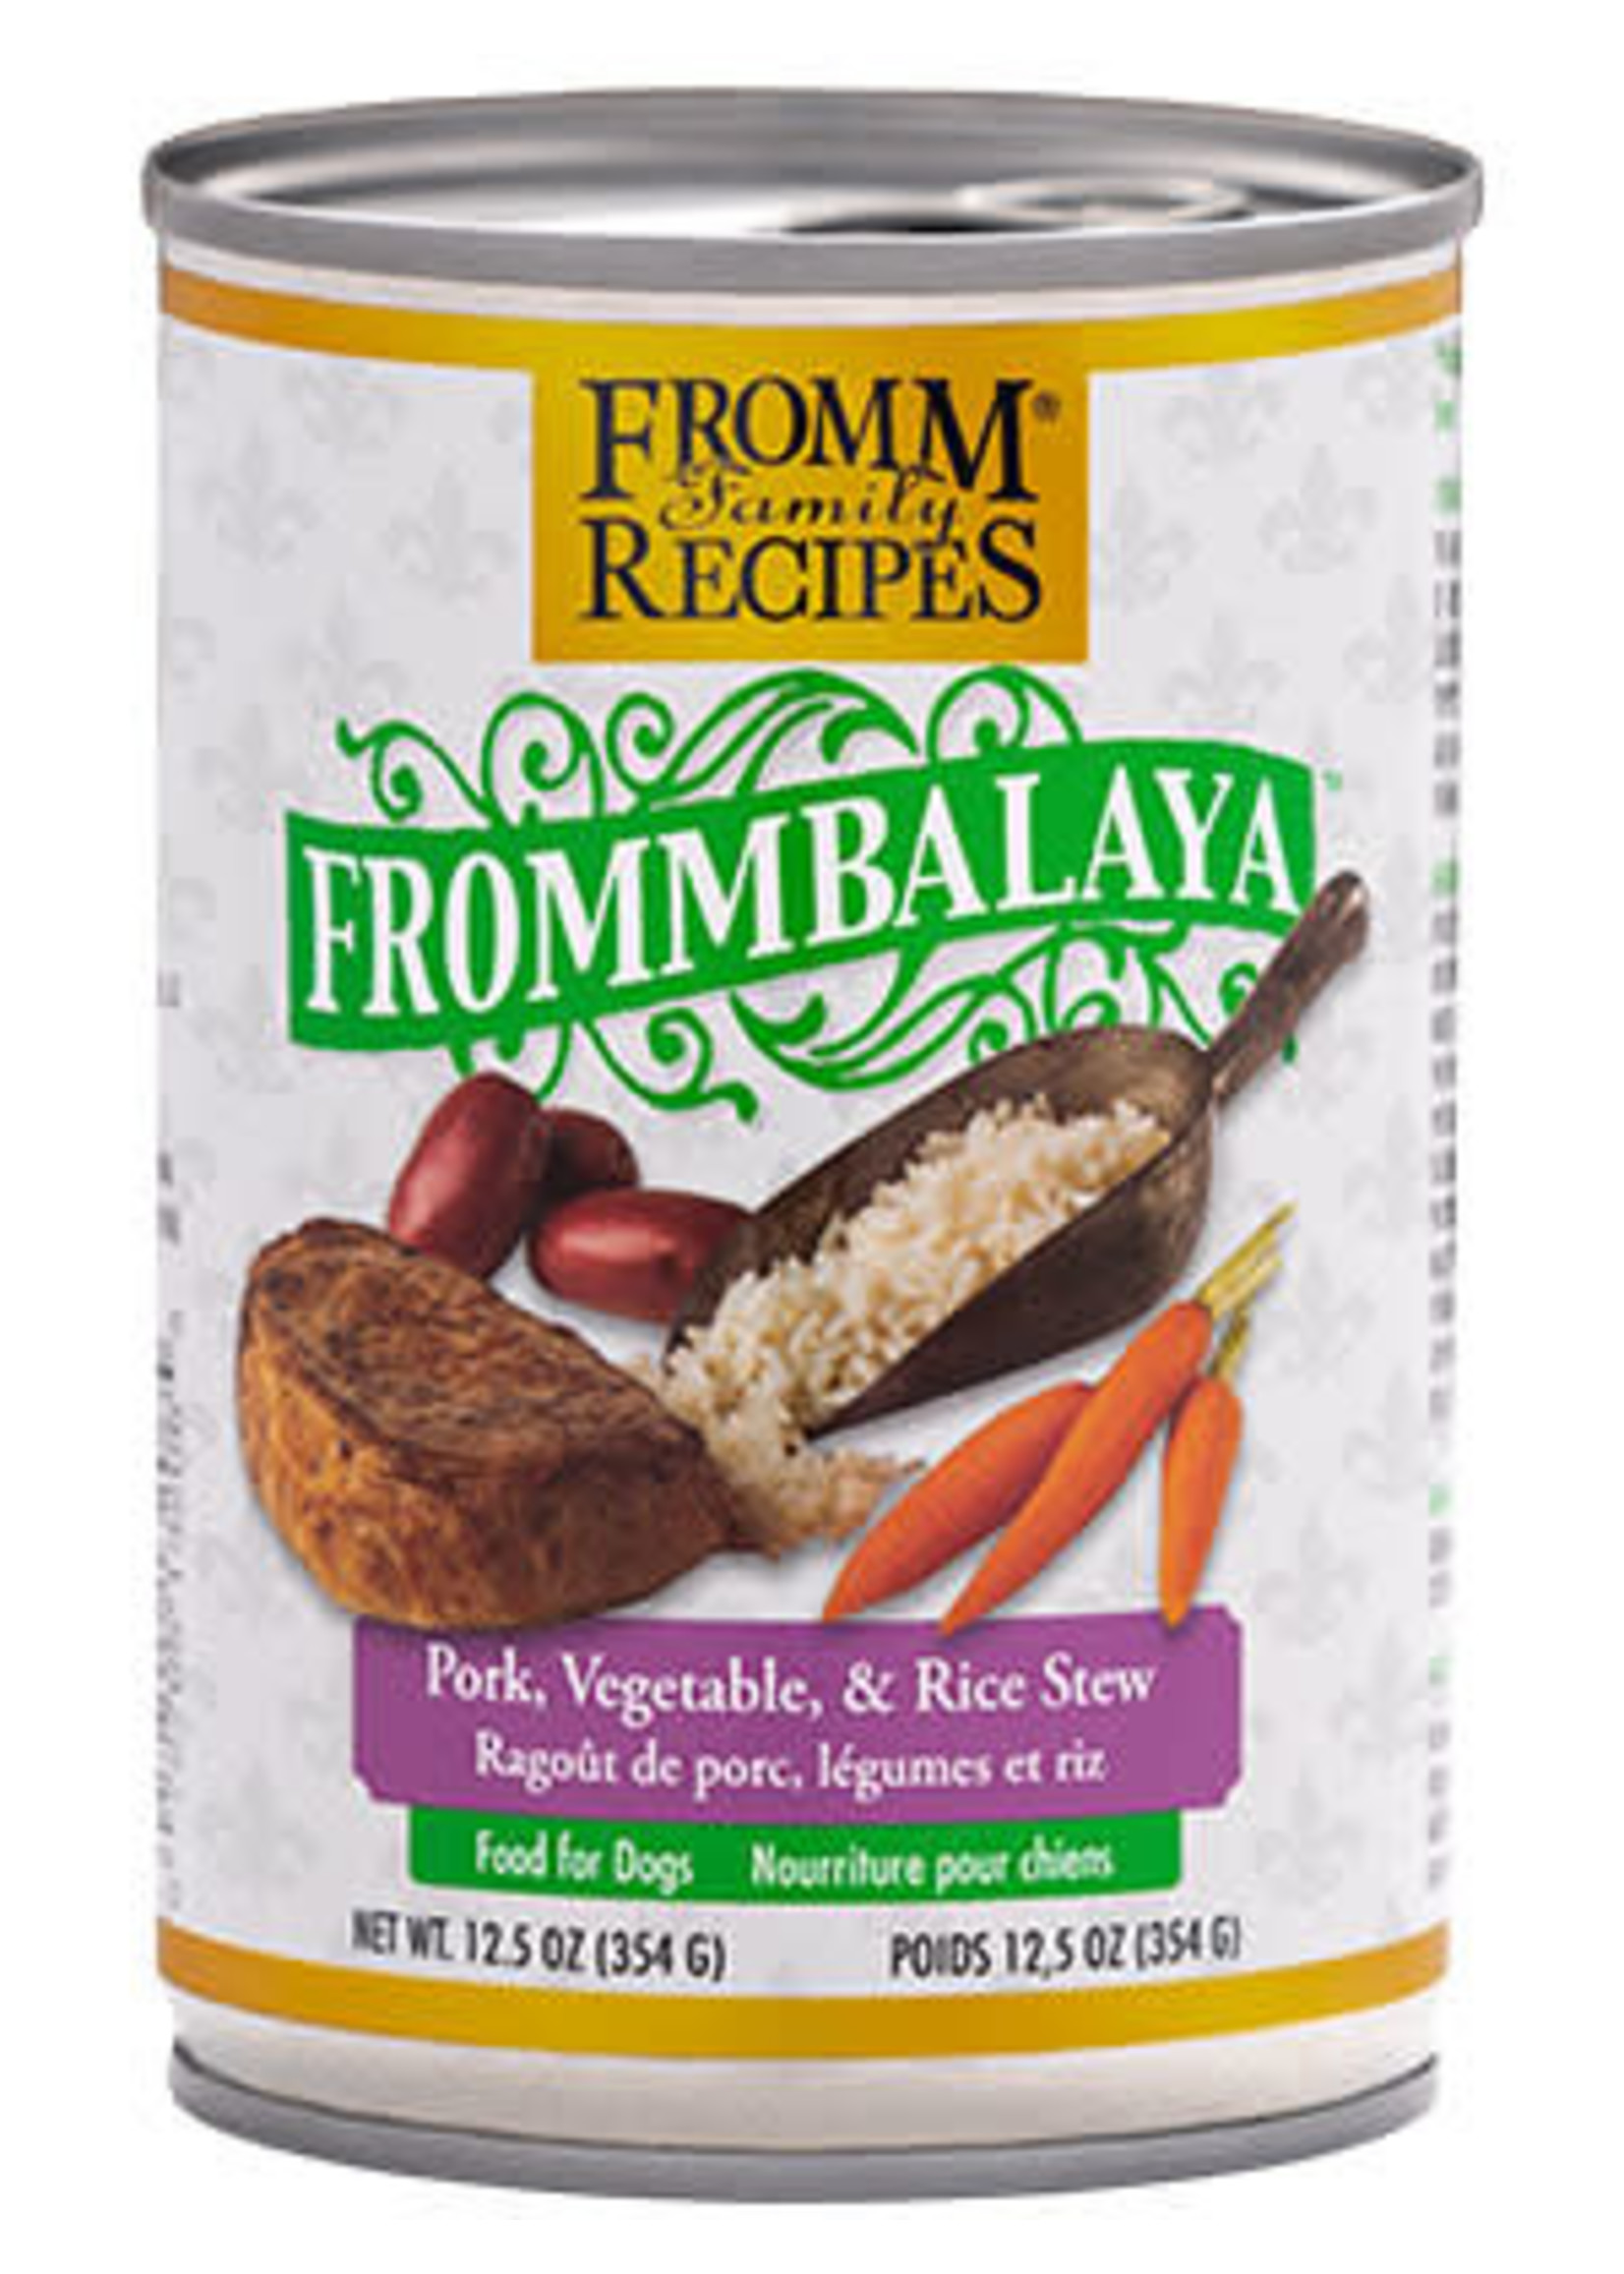 Fromm Family Frommbalaya Pork, Vegetable, & Rice Stew 12.5 oz